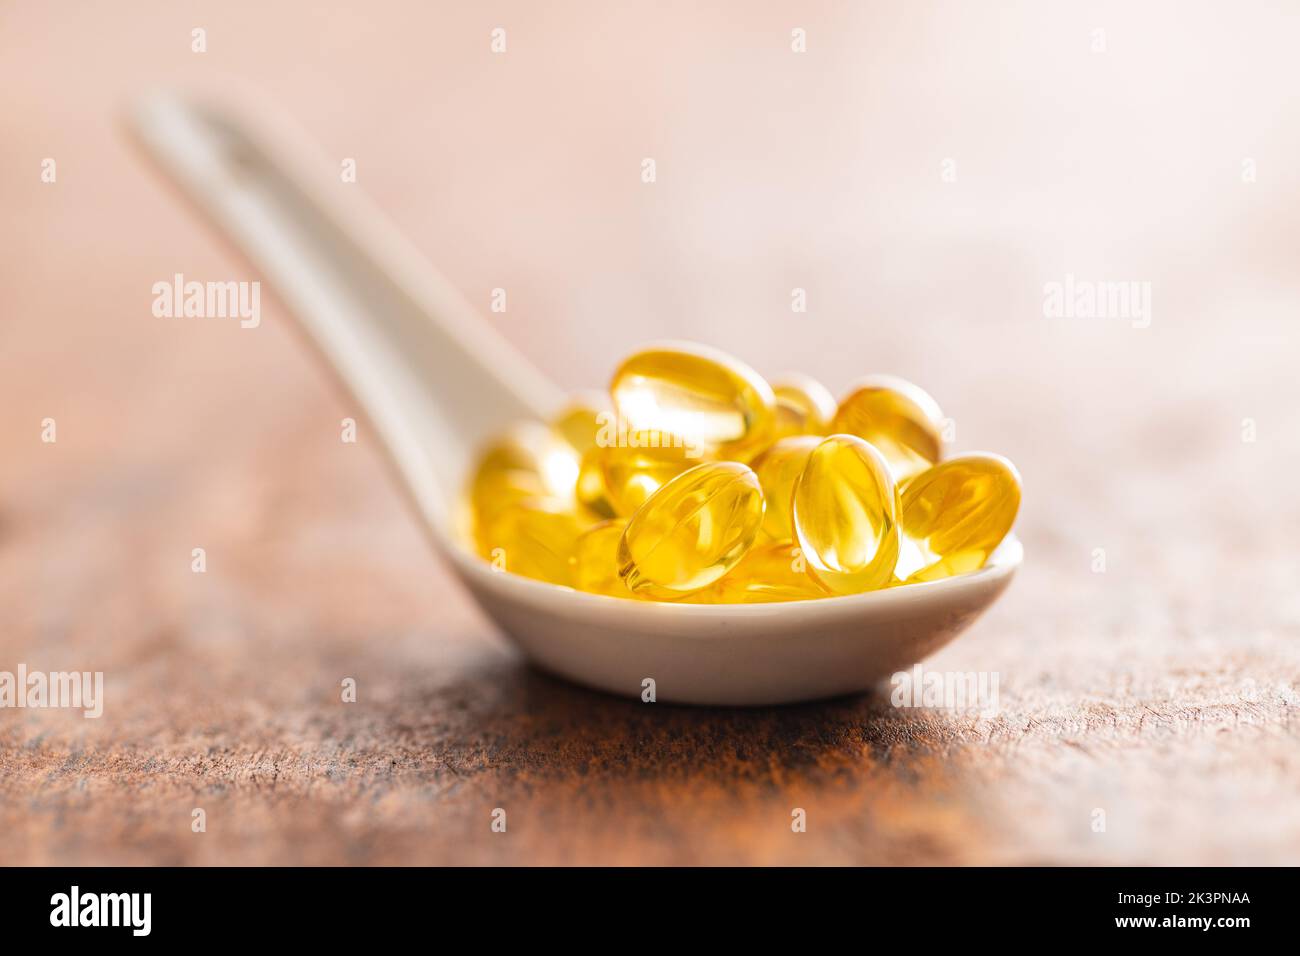 Fish oil capsules. Yellow omega 3 pills in ceramic spoon on the wooden table. Stock Photo